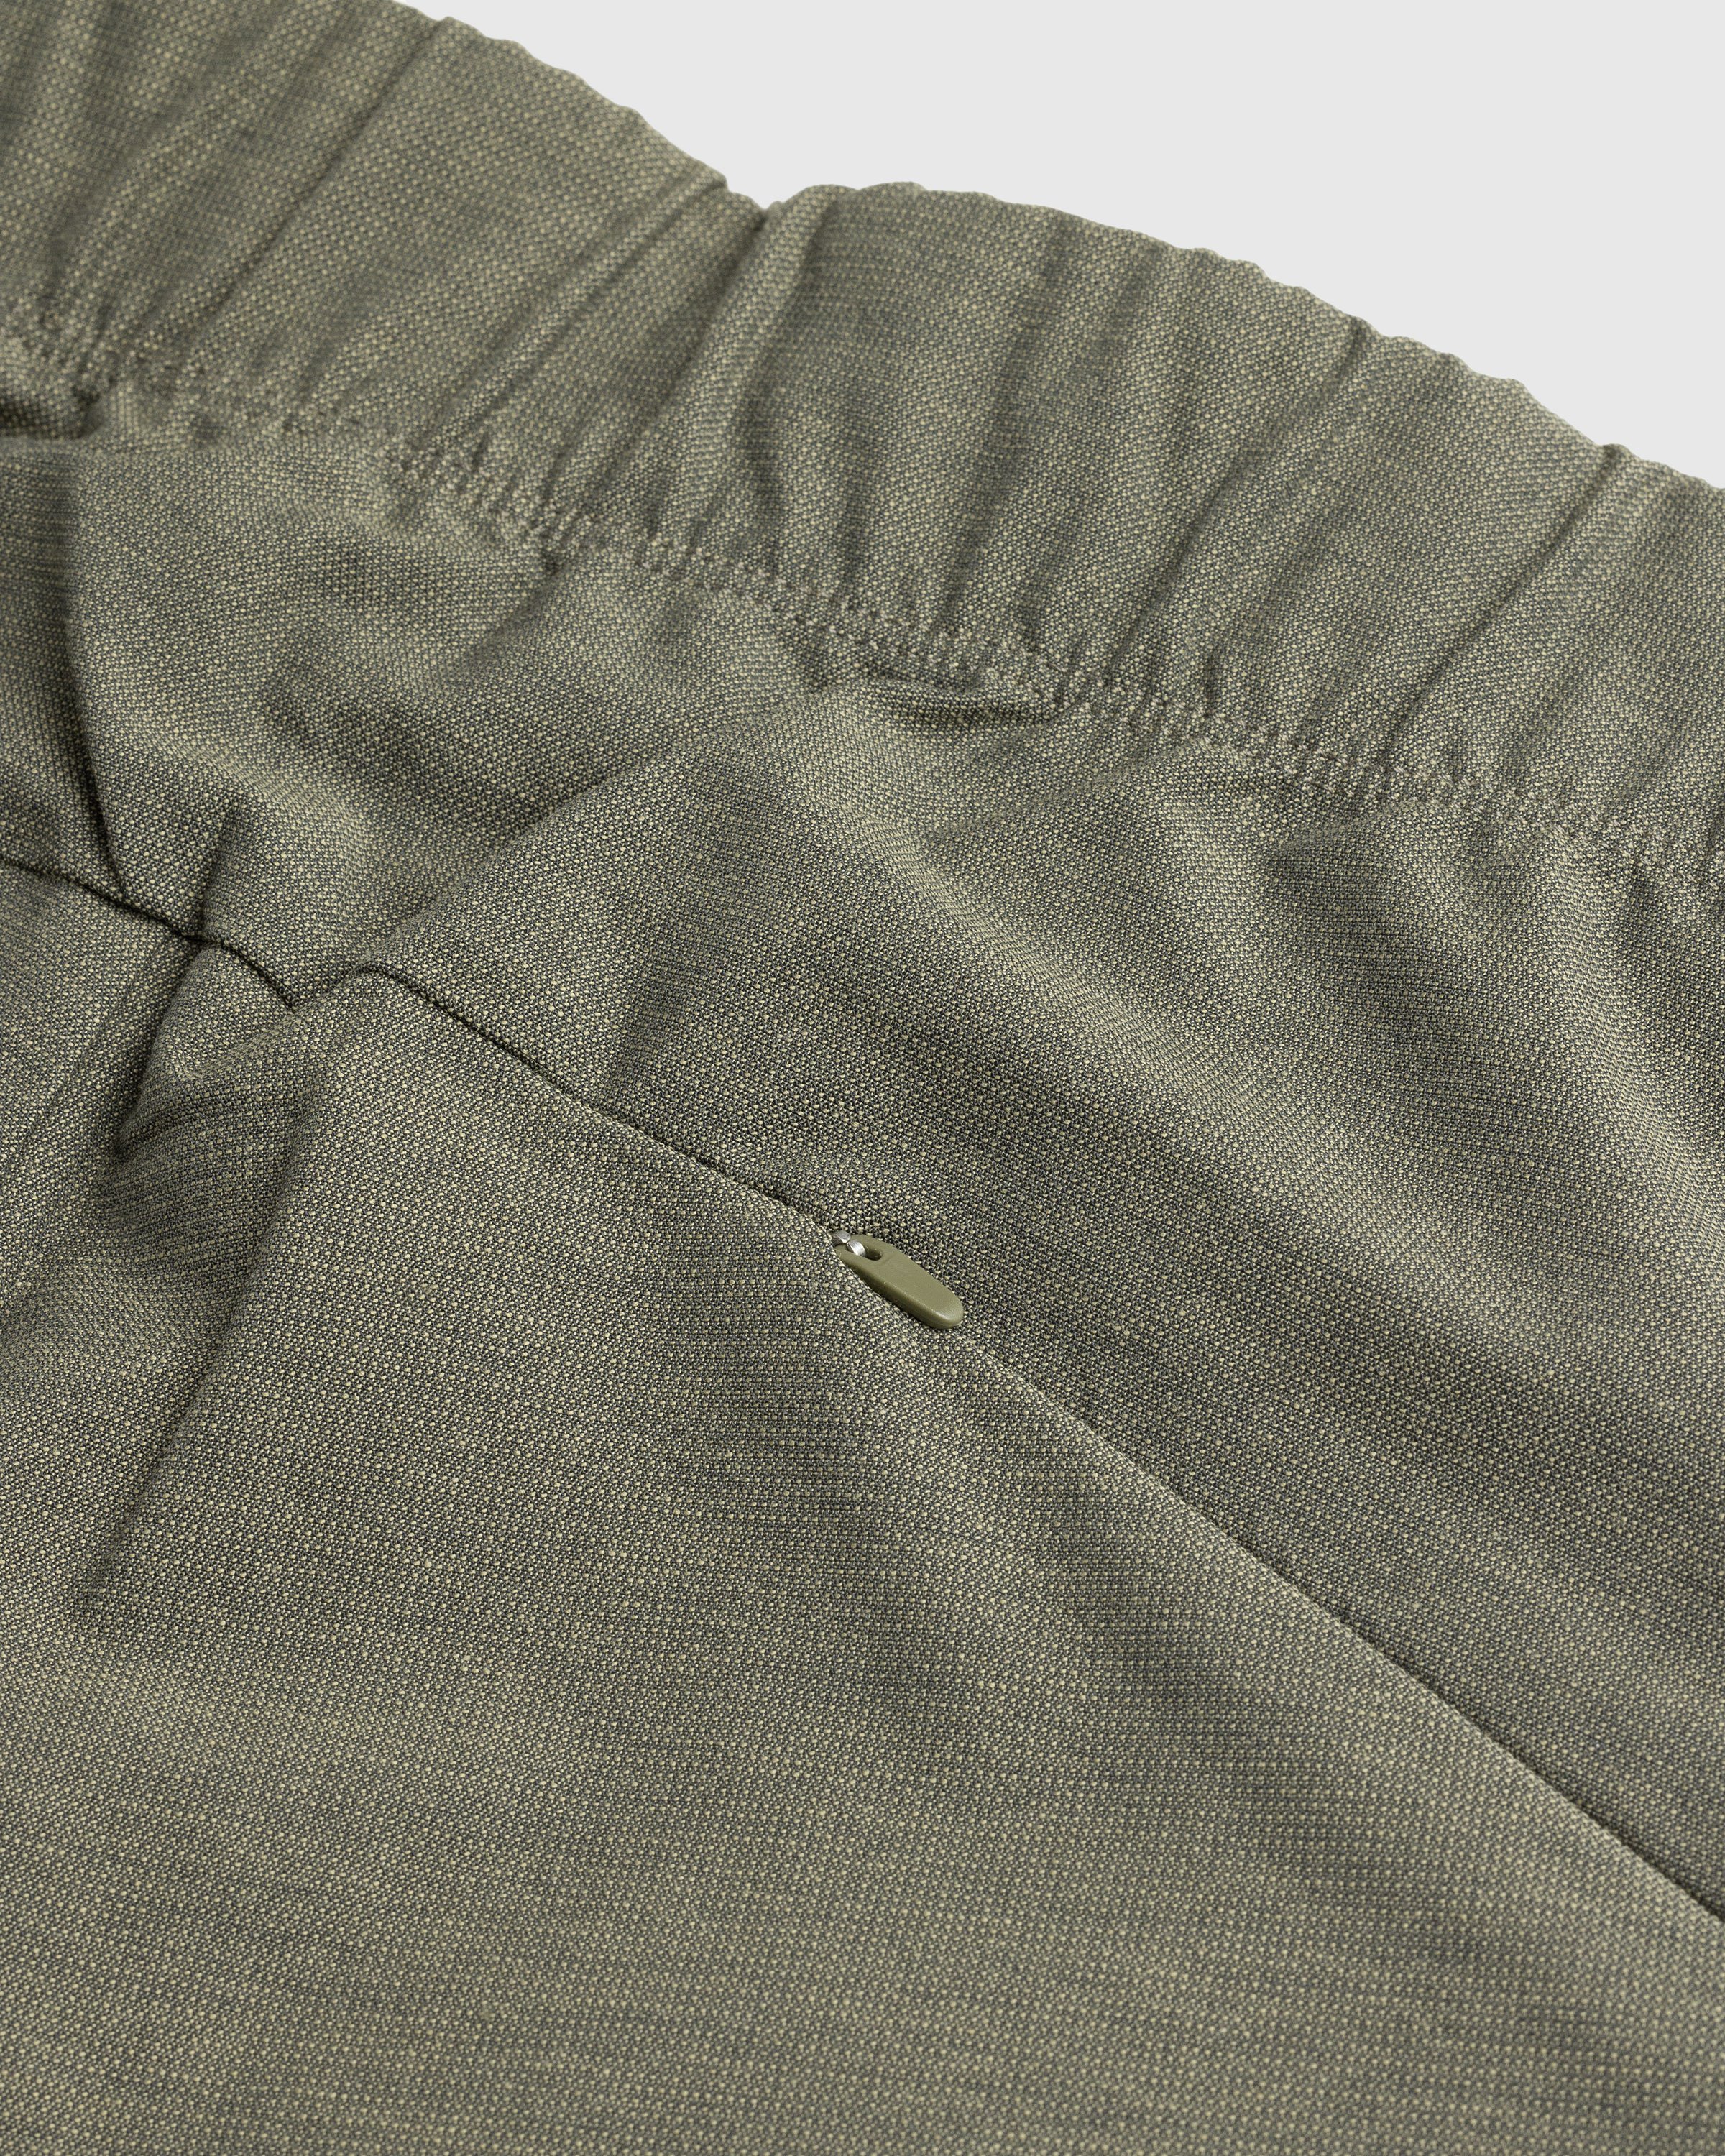 Post Archive Faction (PAF) - 5.1 Technical Pants Right Green - Clothing - Green - Image 7